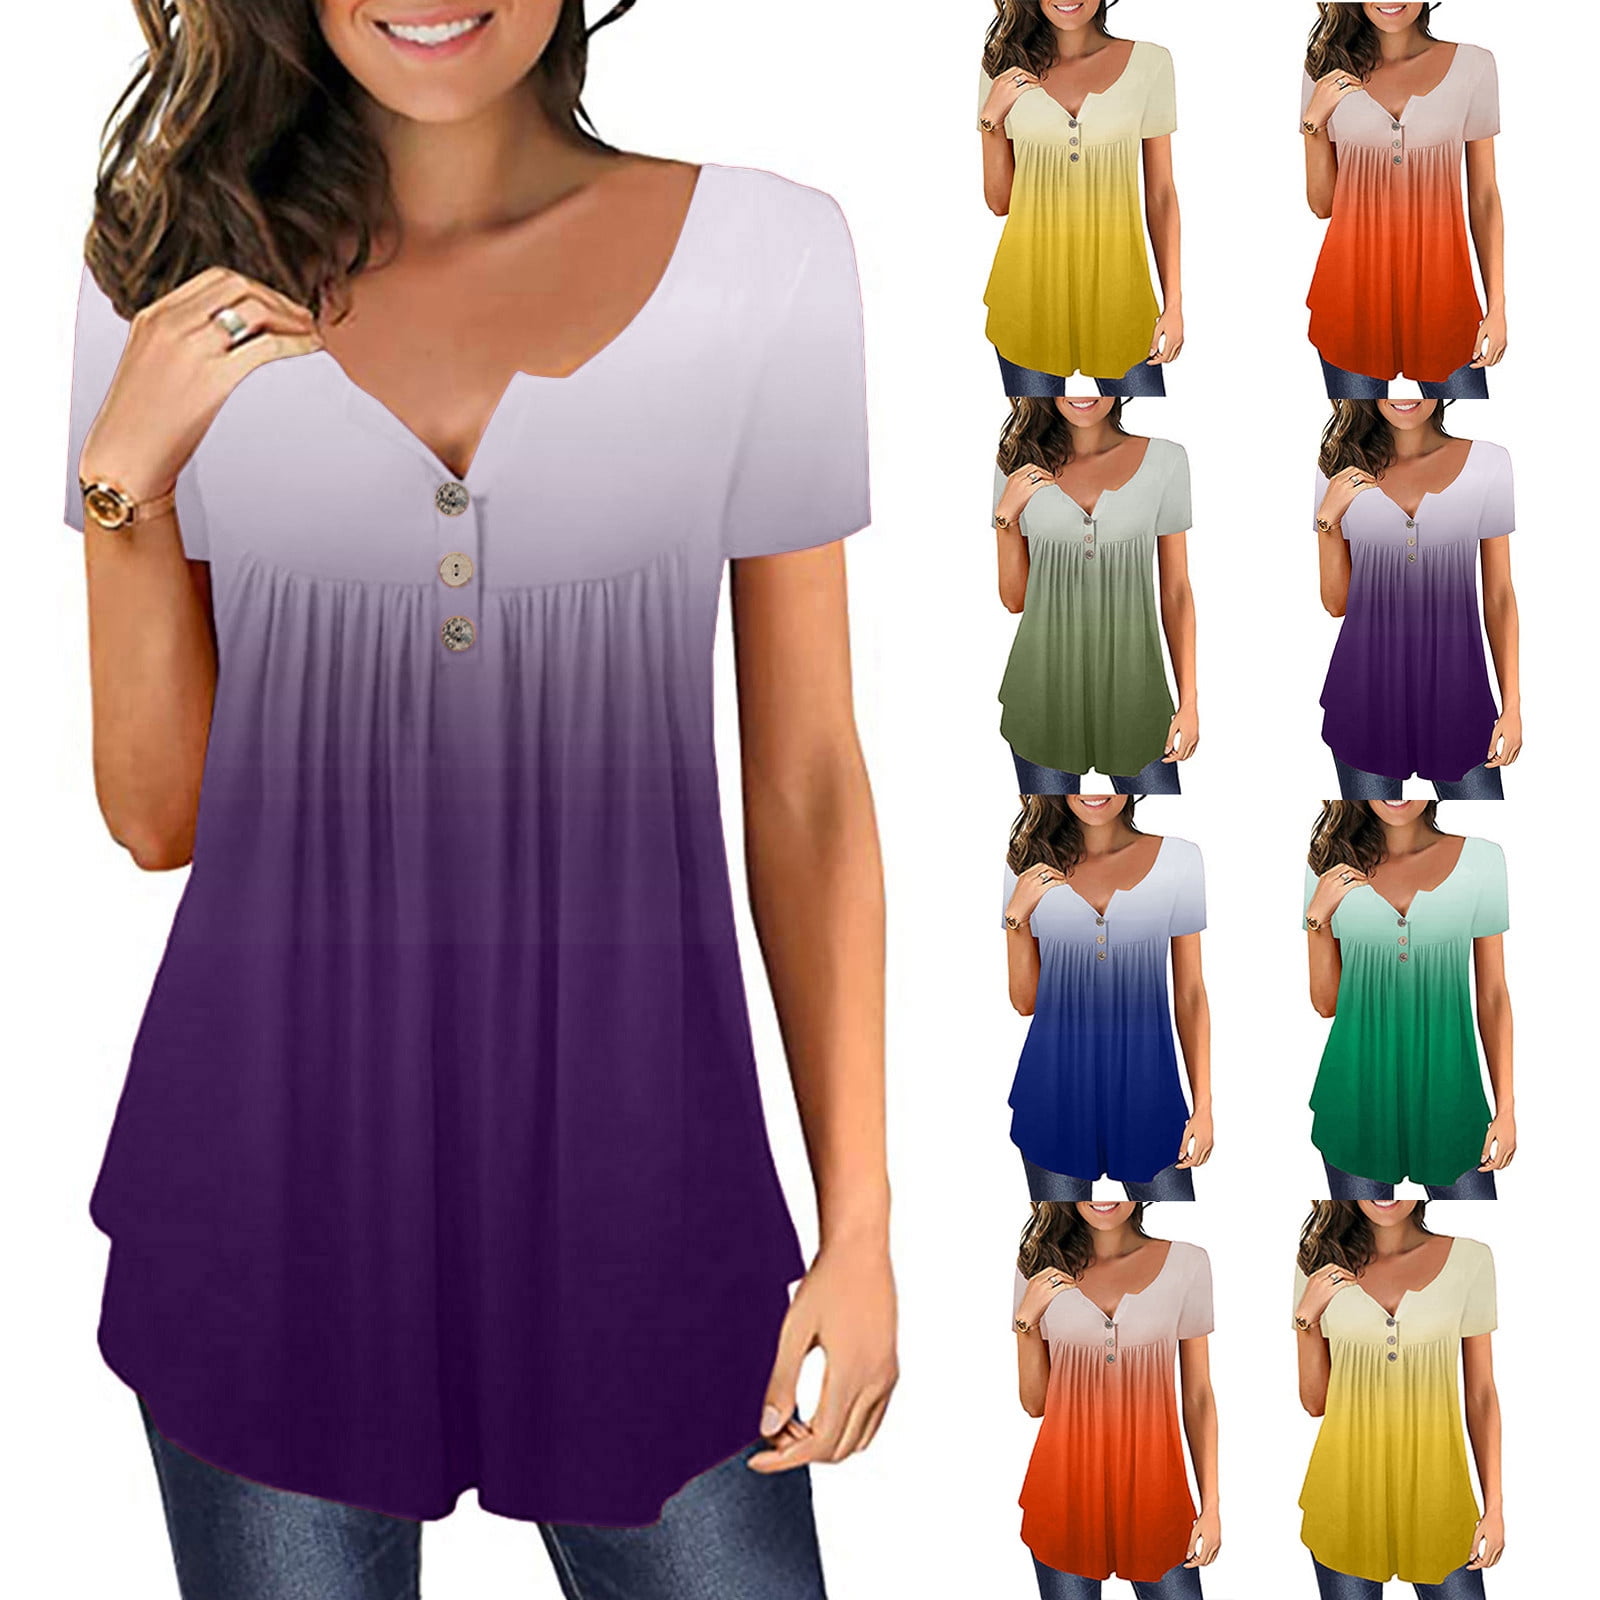 Short Womens Tops - Buy Short Womens Tops Online at Best Prices In